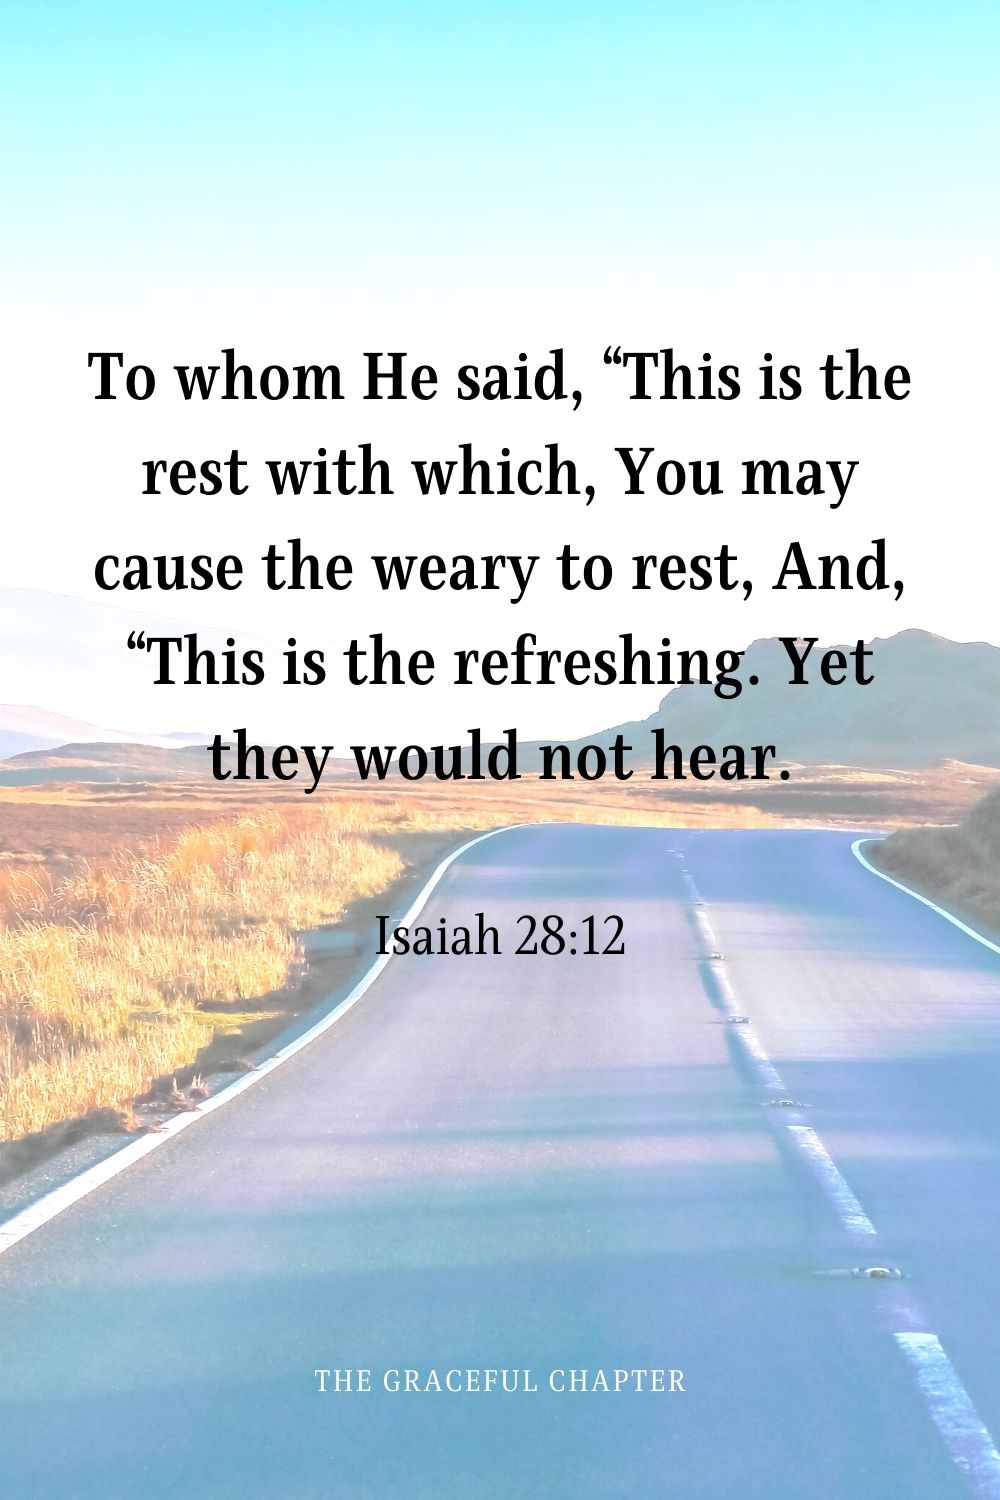 To whom He said, “This is the rest with which, You may cause the weary to rest, And, “This is the refreshing. Yet they would not hear.